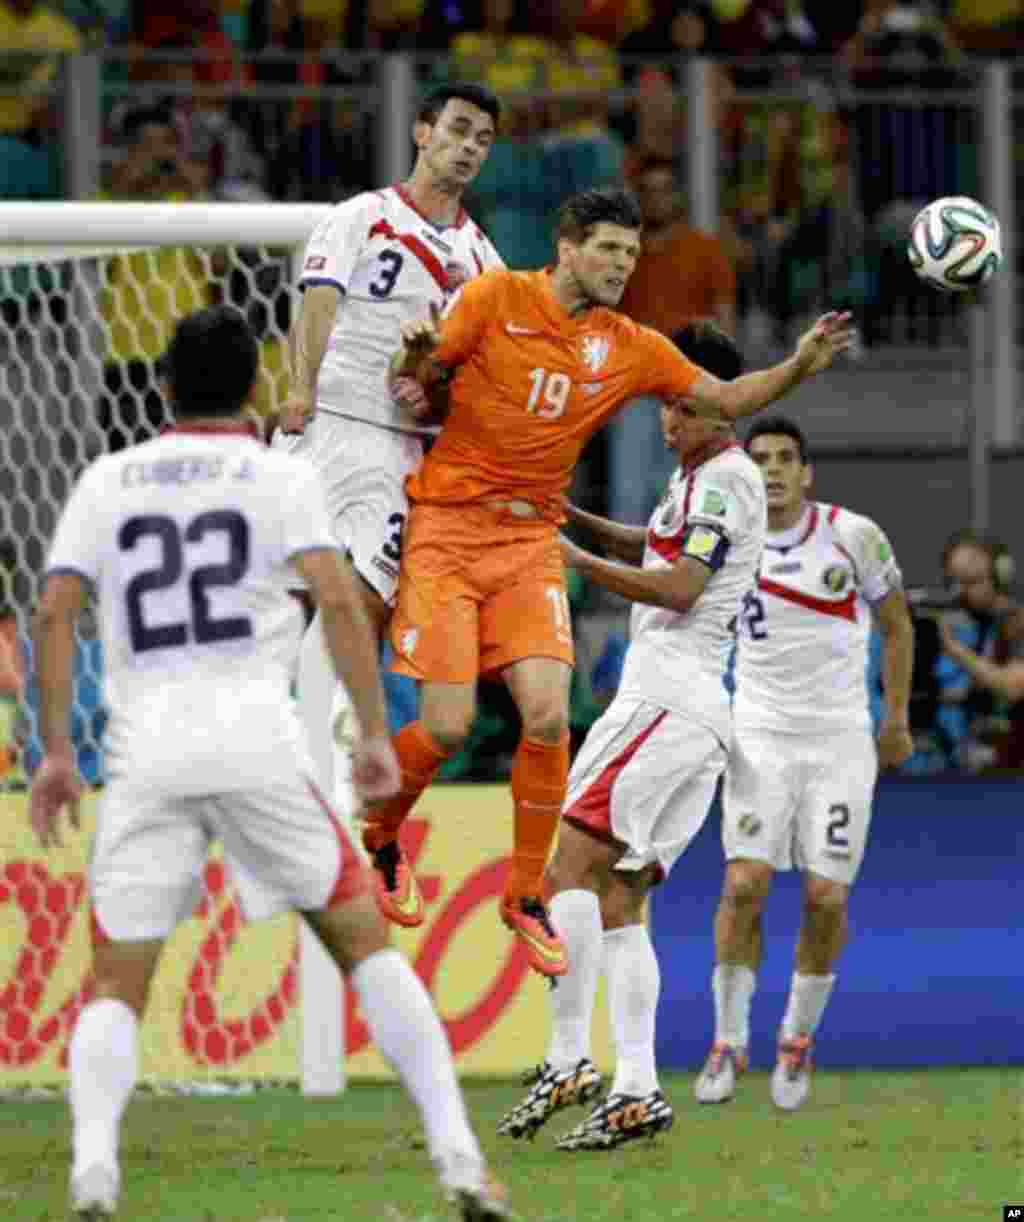 Netherlands' Klaas-Jan Huntelaar (19) and Costa Rica's Giancarlo Gonzalez (3) go for a header during the World Cup quarterfinal soccer match between the Netherlands and Costa Rica at the Arena Fonte Nova in Salvador, Brazil, Saturday, July 5, 2014. (AP Ph